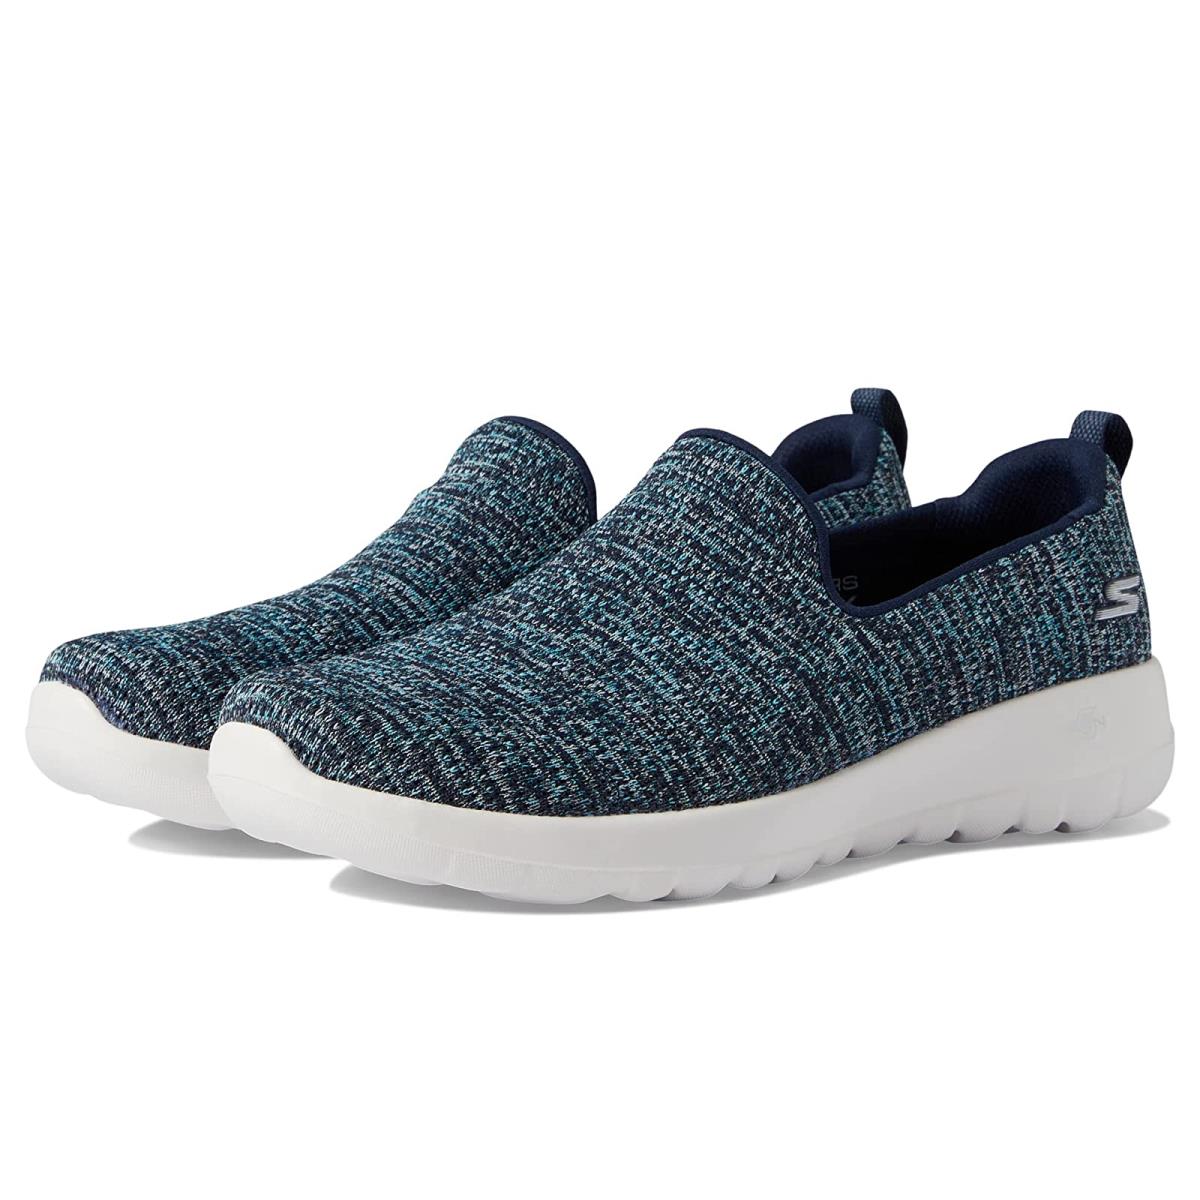 Woman`s Sneakers Athletic Shoes Skechers Performance Go Walk Joy - Everly Navy/Multi